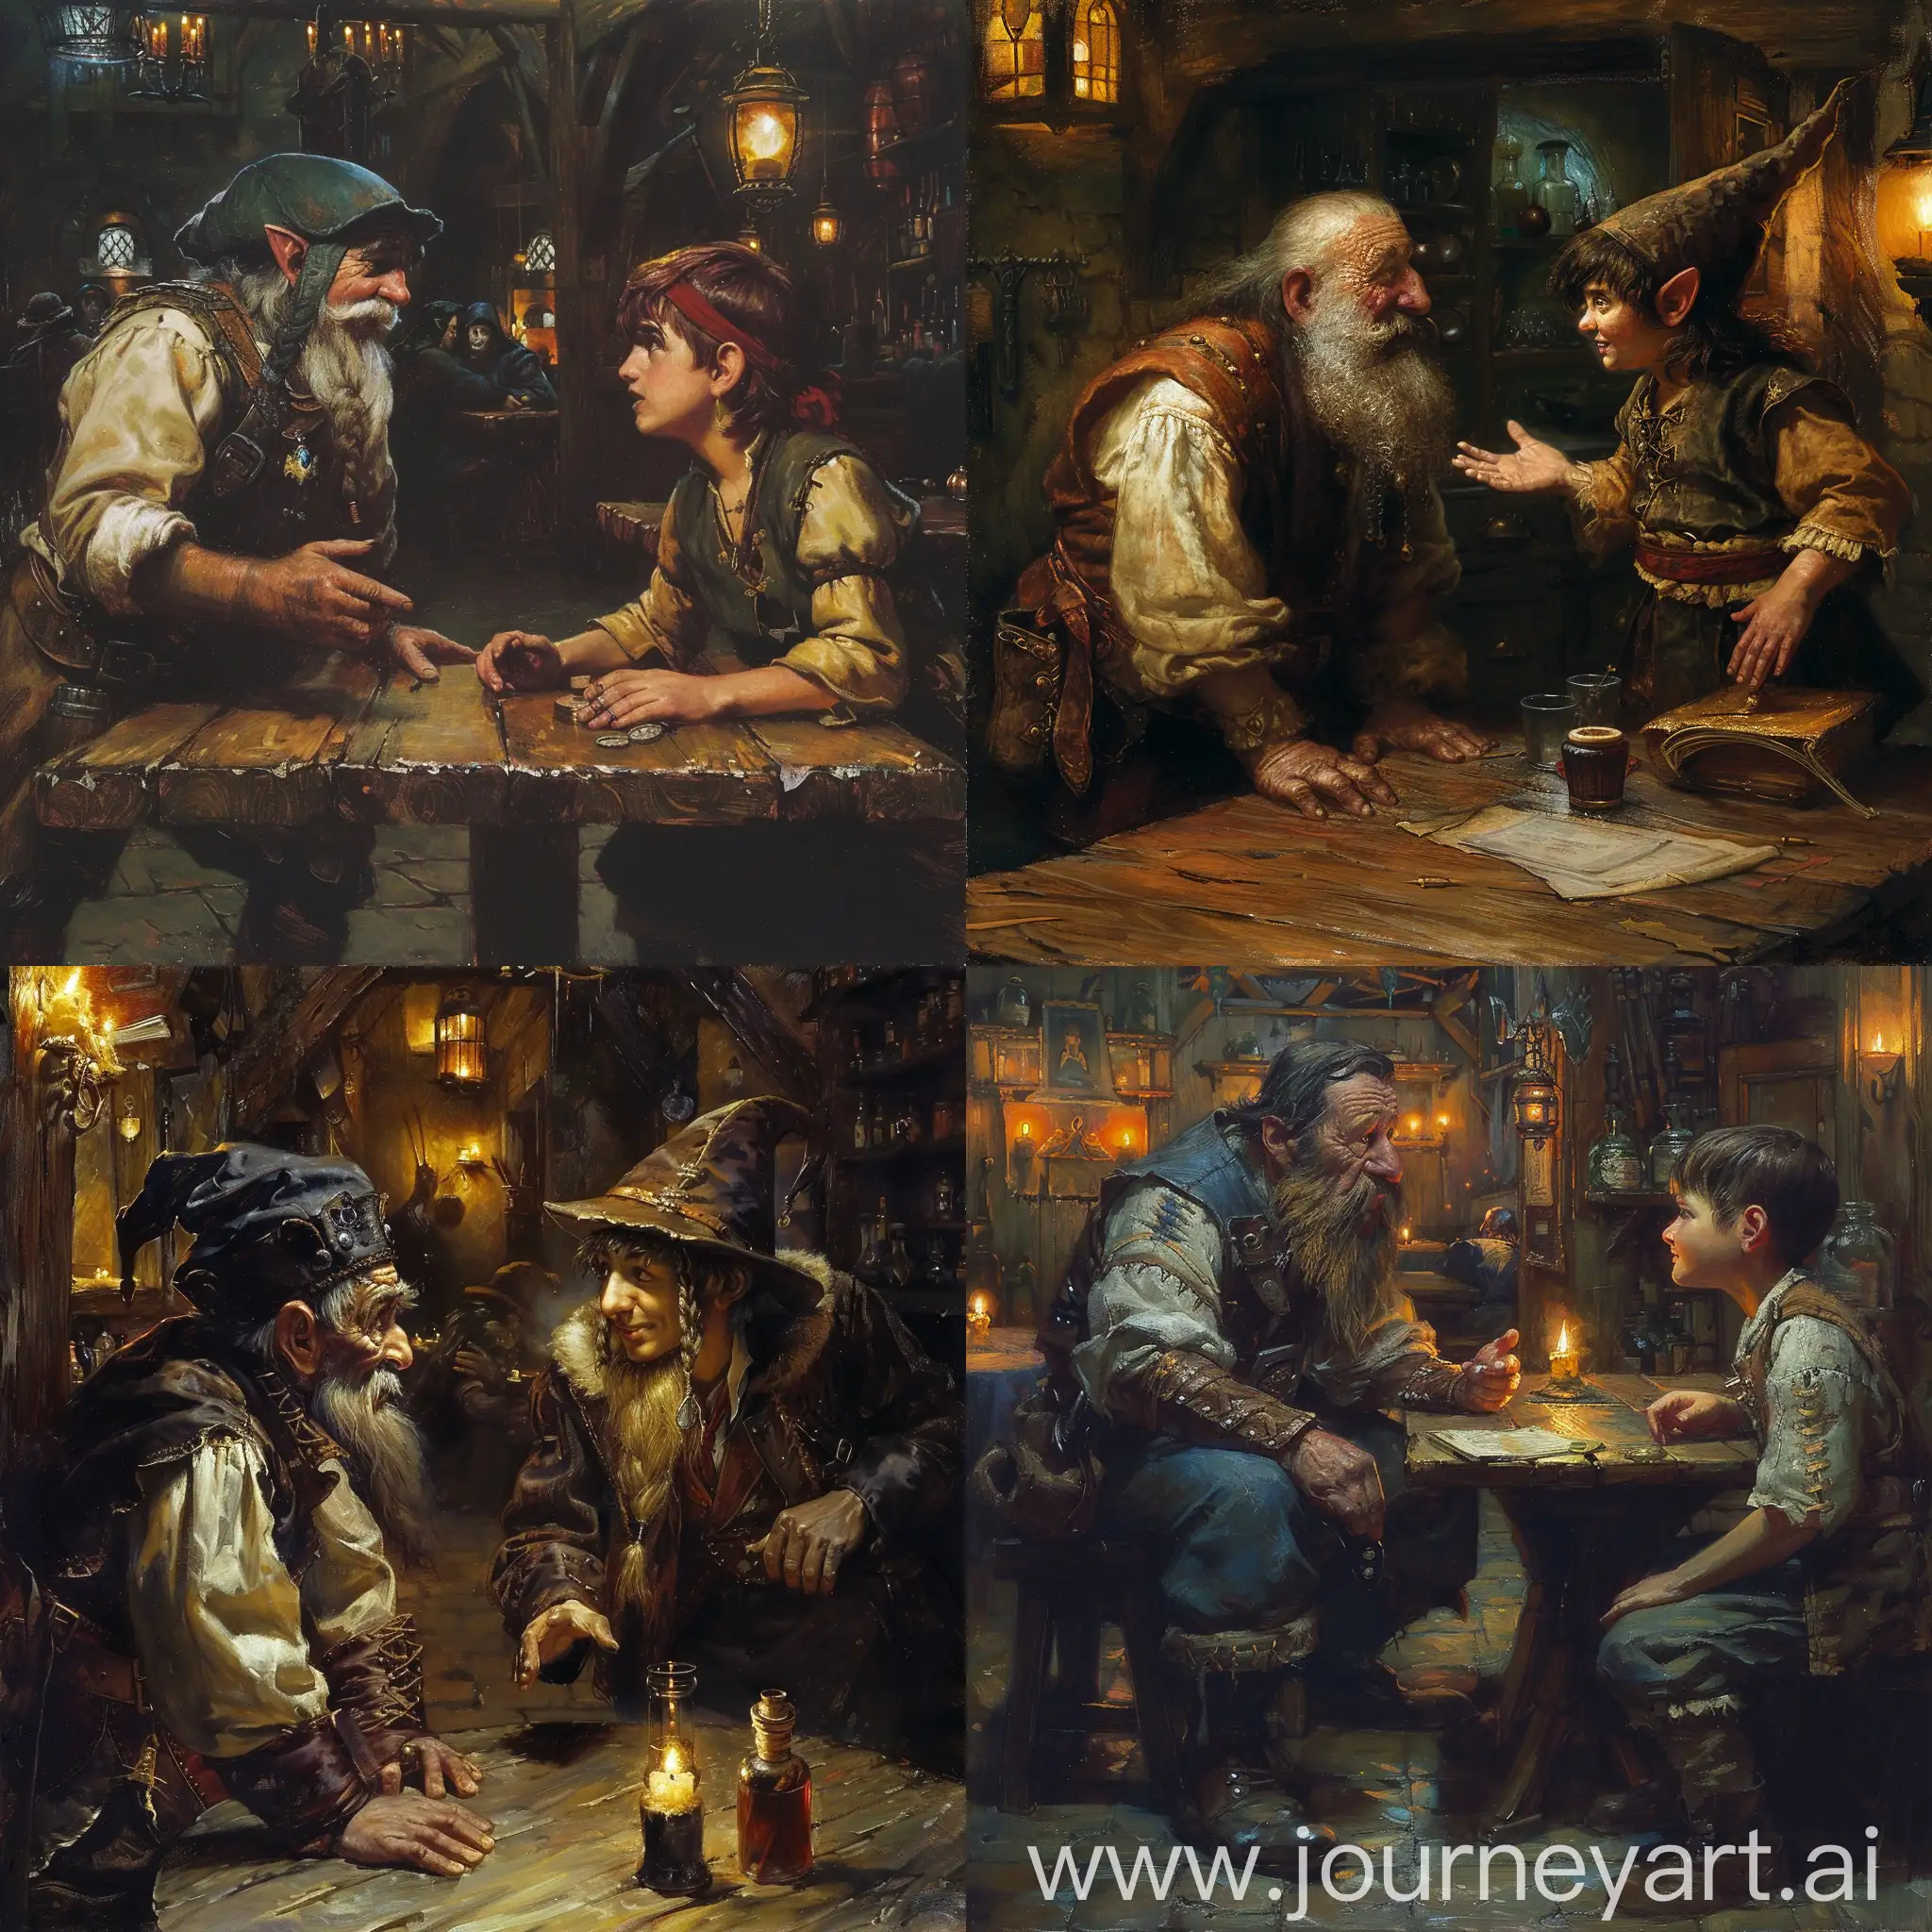 Enchanting-Encounter-Dwarf-and-Young-Magician-Discuss-in-Dimly-Lit-Tavern